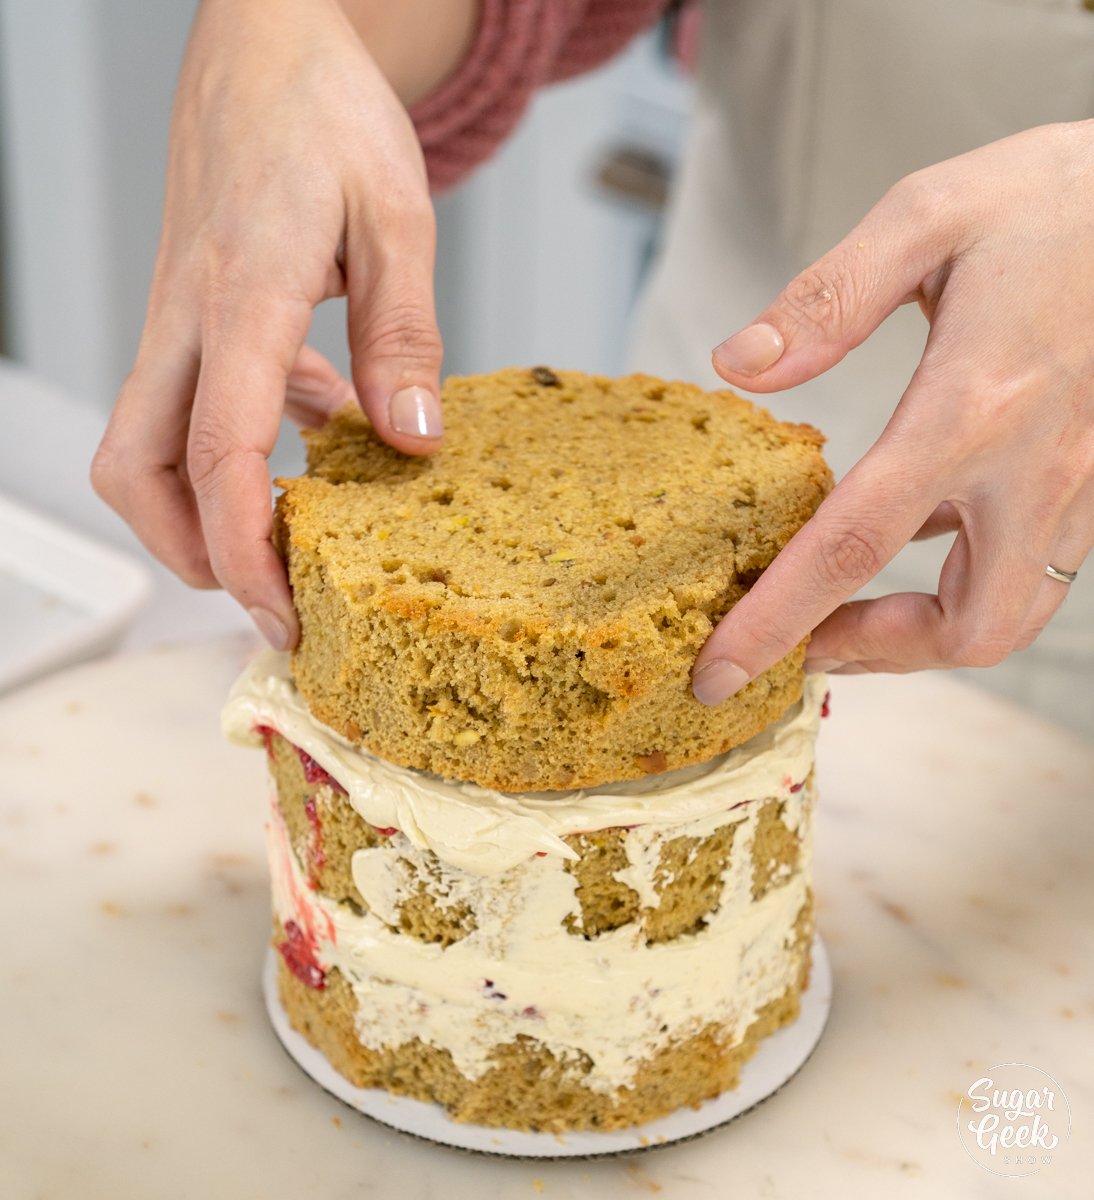 adding the top layer of cake to the pistachio cake